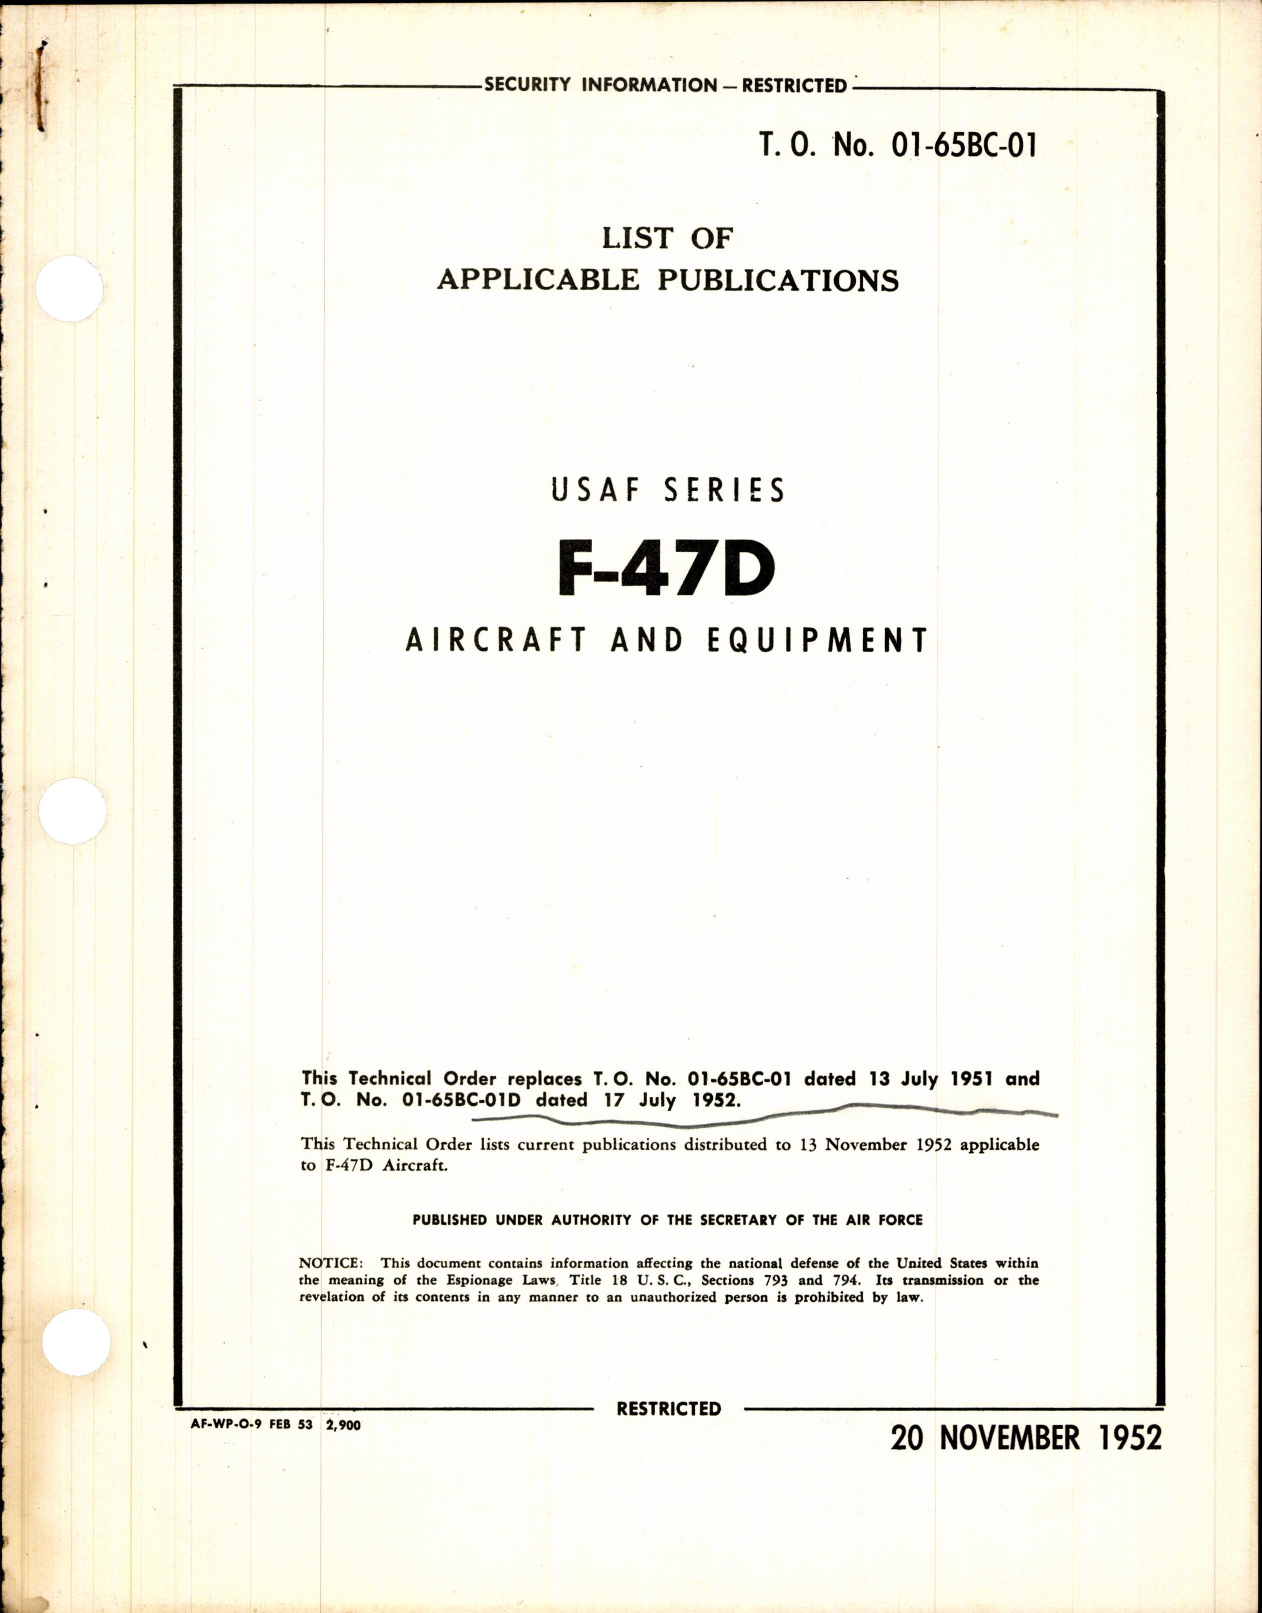 Sample page 1 from AirCorps Library document: List of Applicable Publications for F-47D Aircraft and Equipment